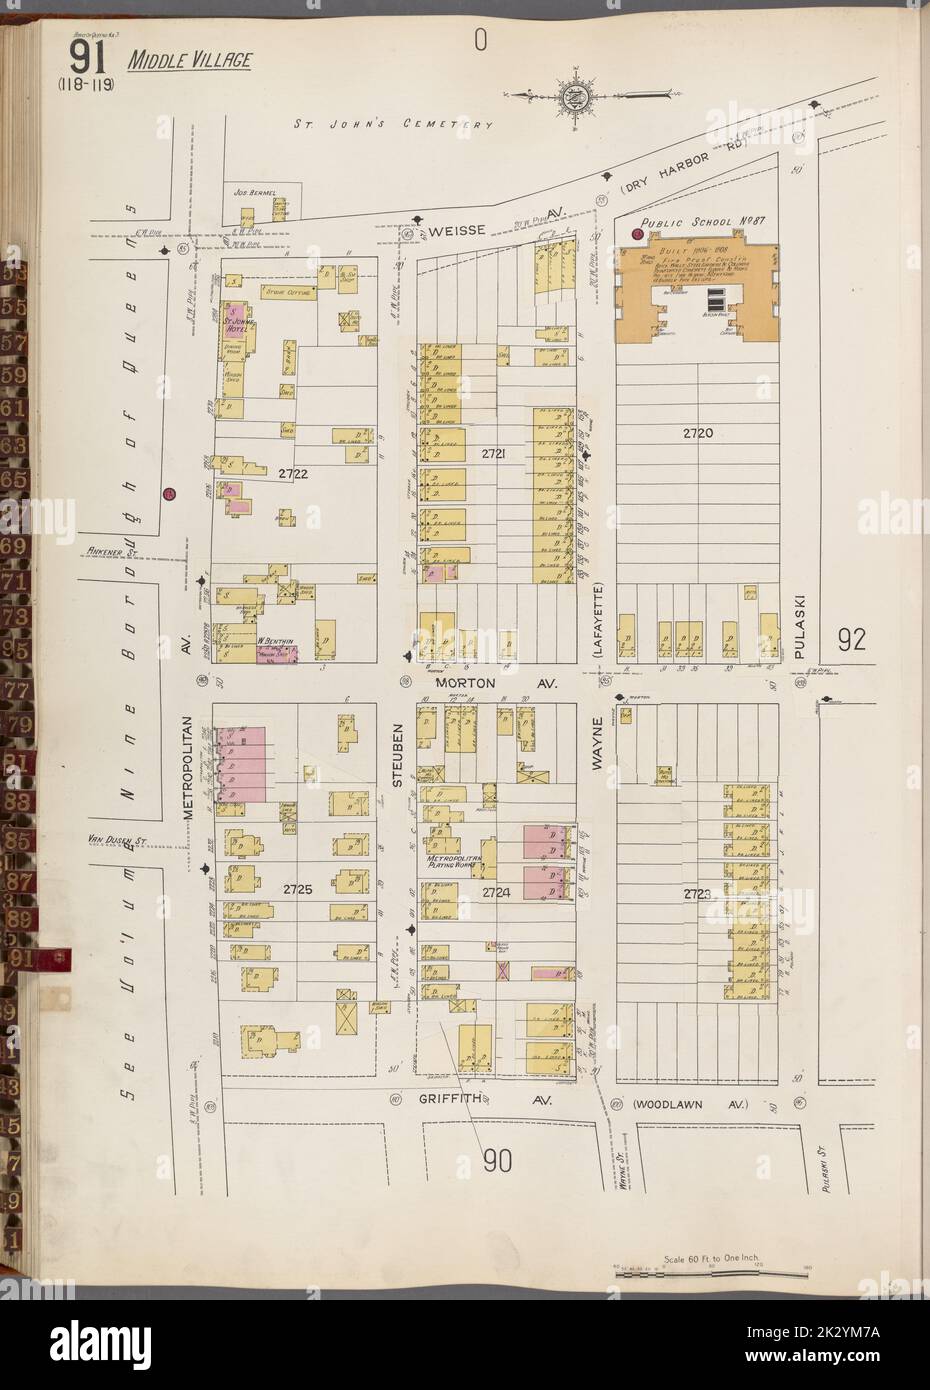 Cartographic, Maps. 1884 - 1936. Lionel Pincus and Princess Firyal Map Division. Fire insurance , New York (State), Real property , New York (State), Cities & towns , New York (State) Queens V. 3, Plate No. 91 Map bounded by Weisse Ave., Pulaski, Griffith Ave., Metropolitan Ave. Stock Photo